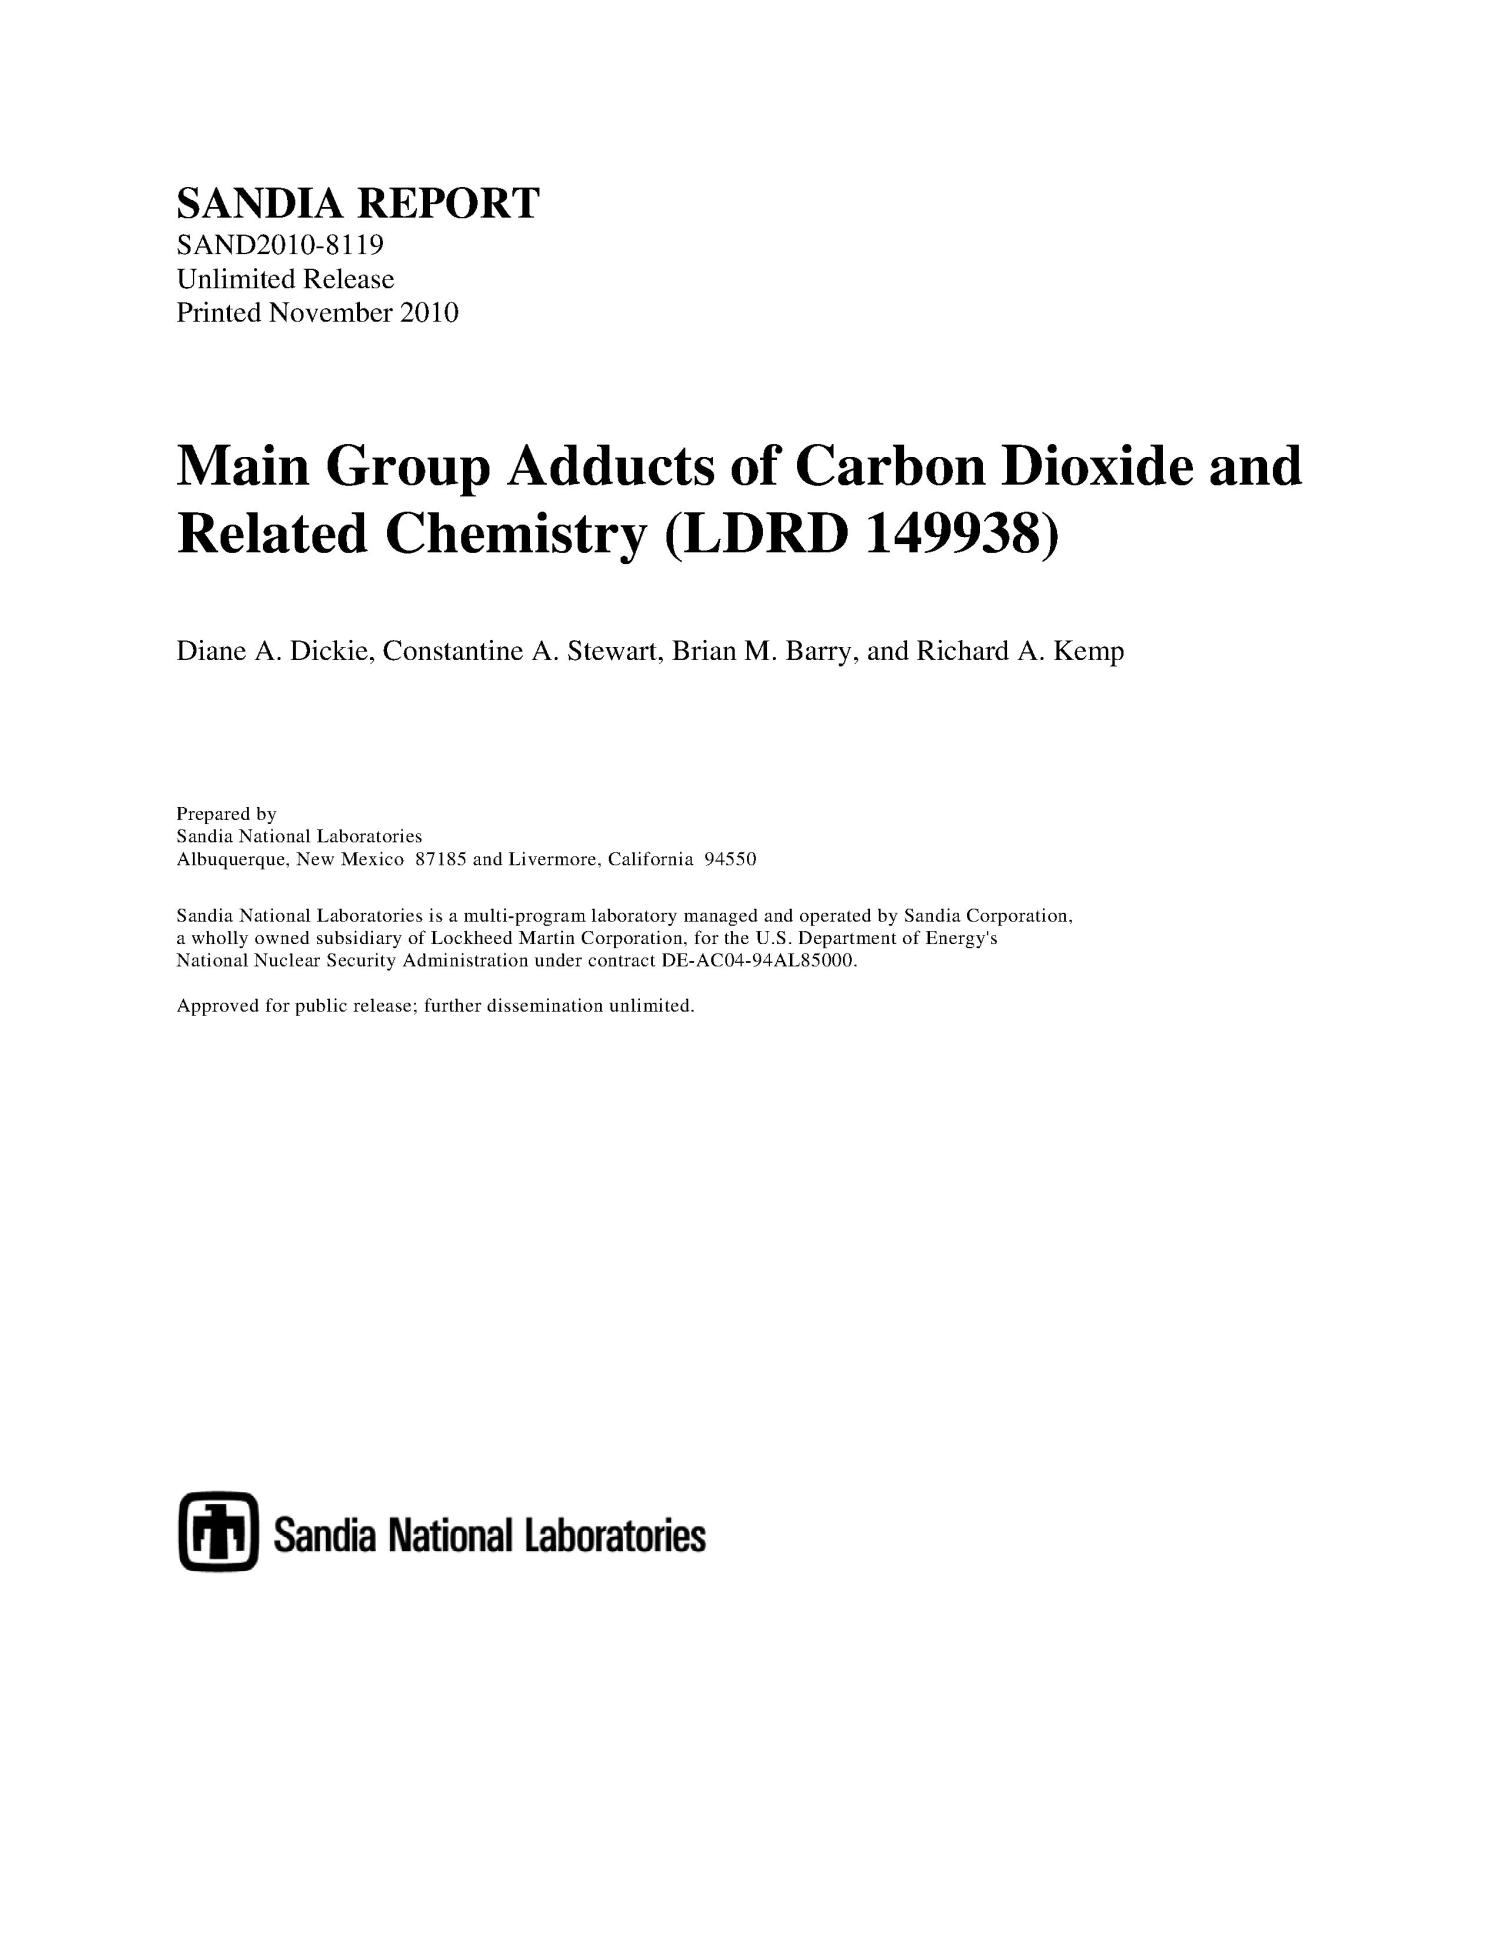 Main group adducts of carbon dioxide and related chemistry (LDRD 149938).
                                                
                                                    [Sequence #]: 1 of 24
                                                